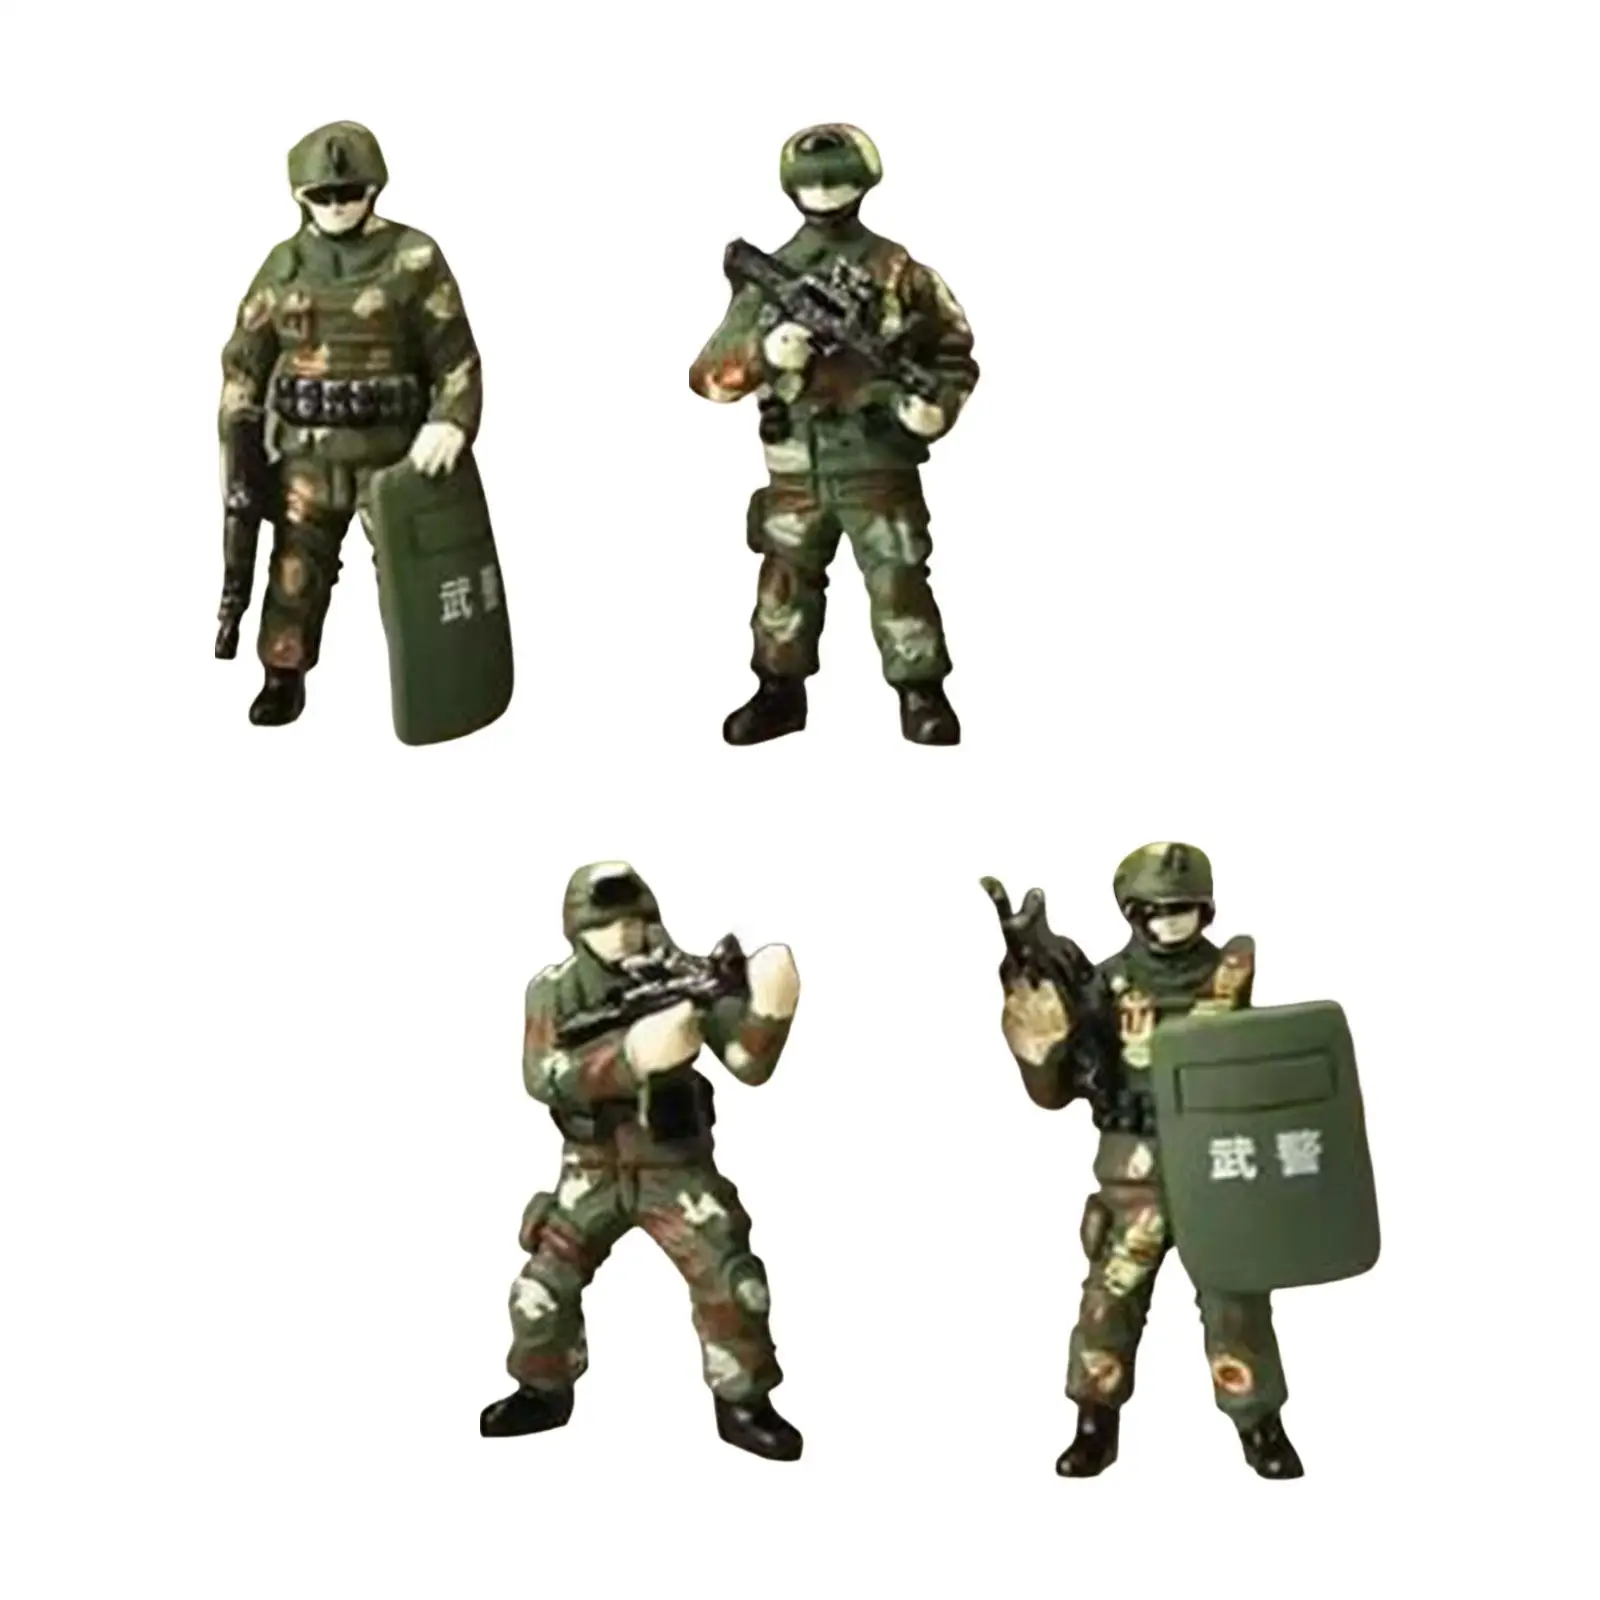 4 Pieces 1:64 Scale Tiny People Model Special Forces Model Figures Painted Action Figures Soldiers Toys for DIY Projects S Scale